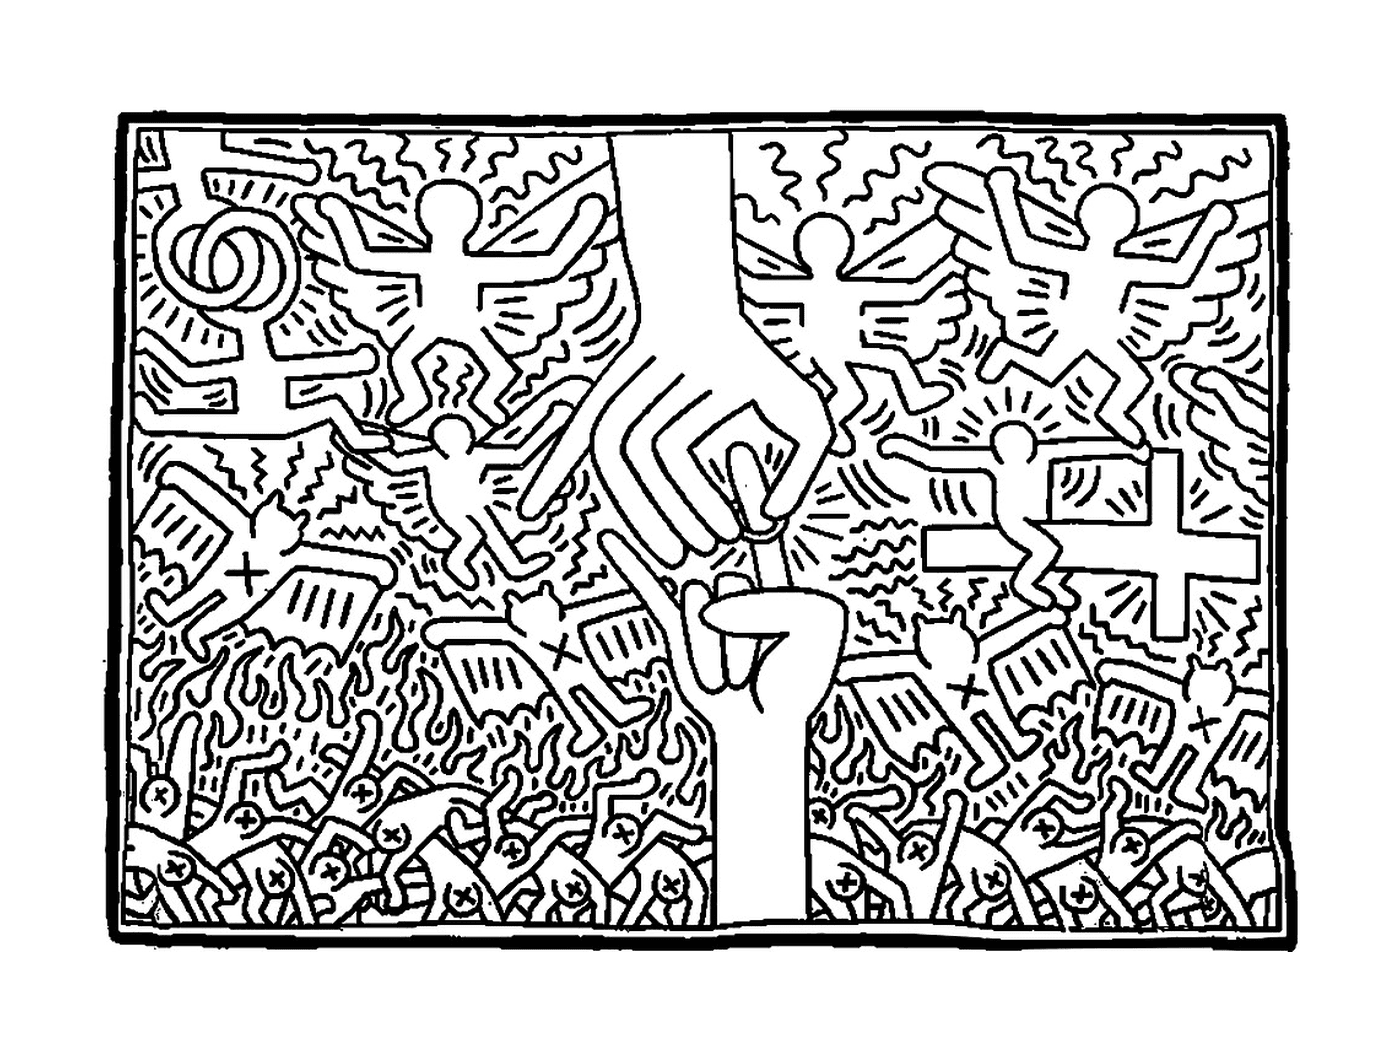  a hand that seeks to catch a sign of peace in Keith Haring's style 